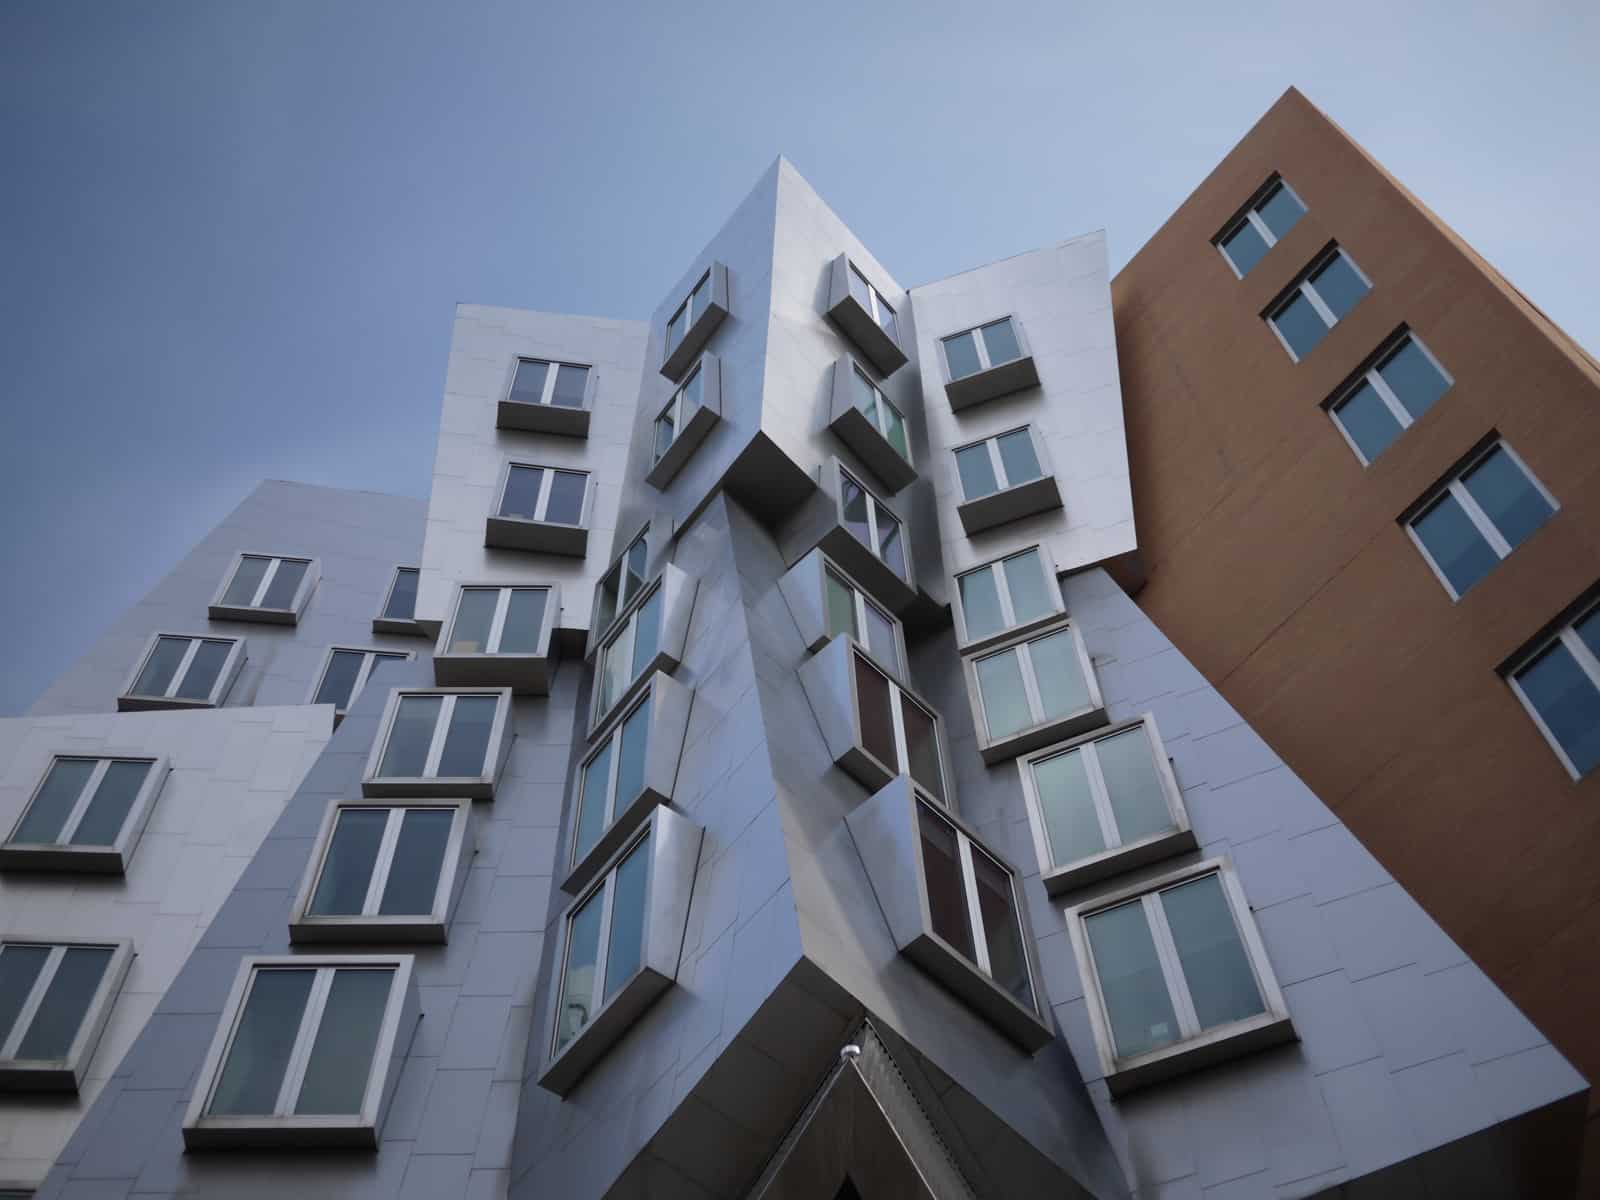 Angled apartments